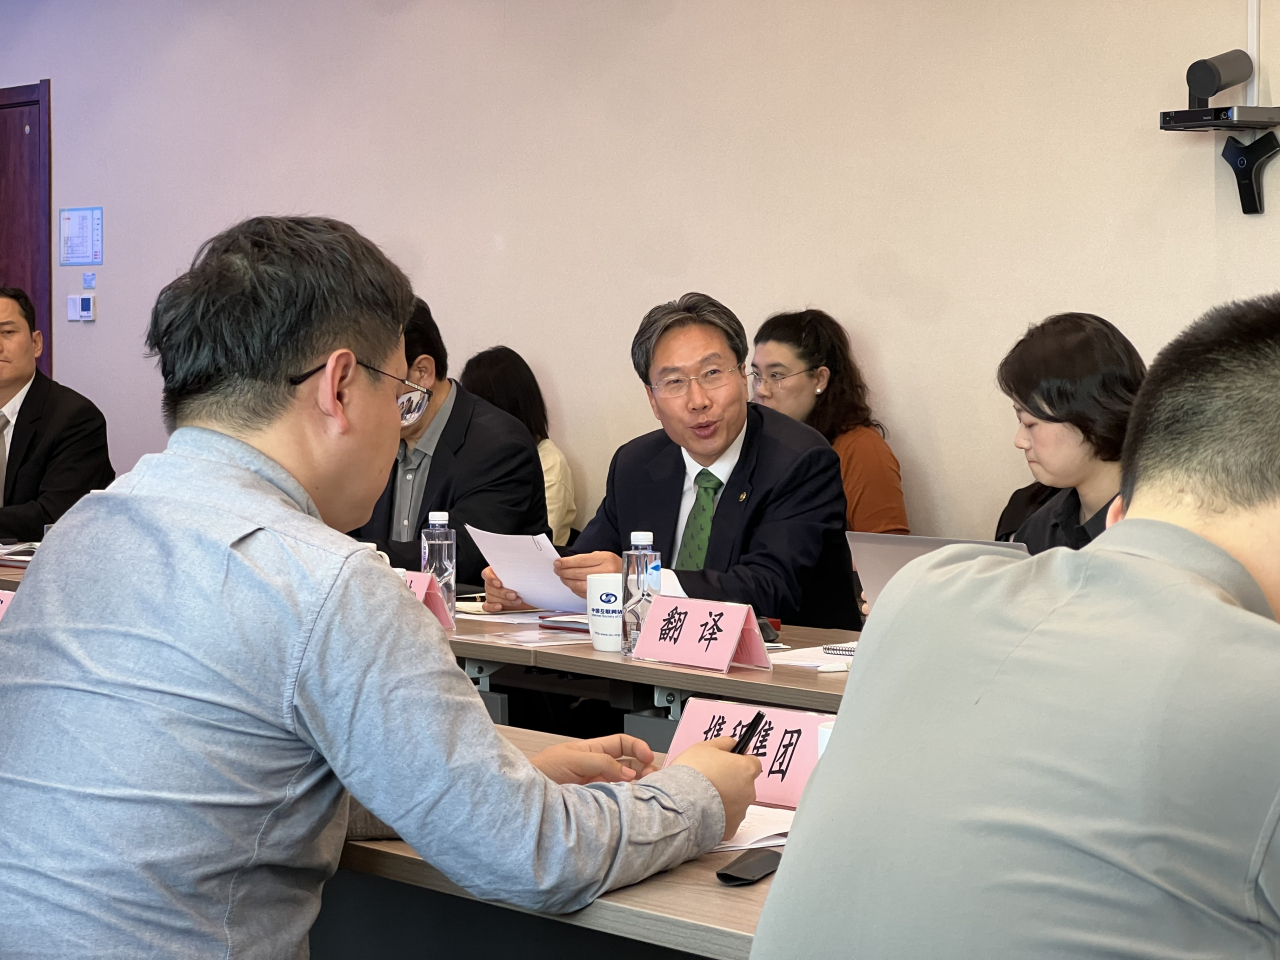 Personal Information Protection Commission Vice Chairperson Choi Jang-hyuk speaks during a meeting in Beijing with officials from several Chinese internet firms, Thursday. (Yonhap)